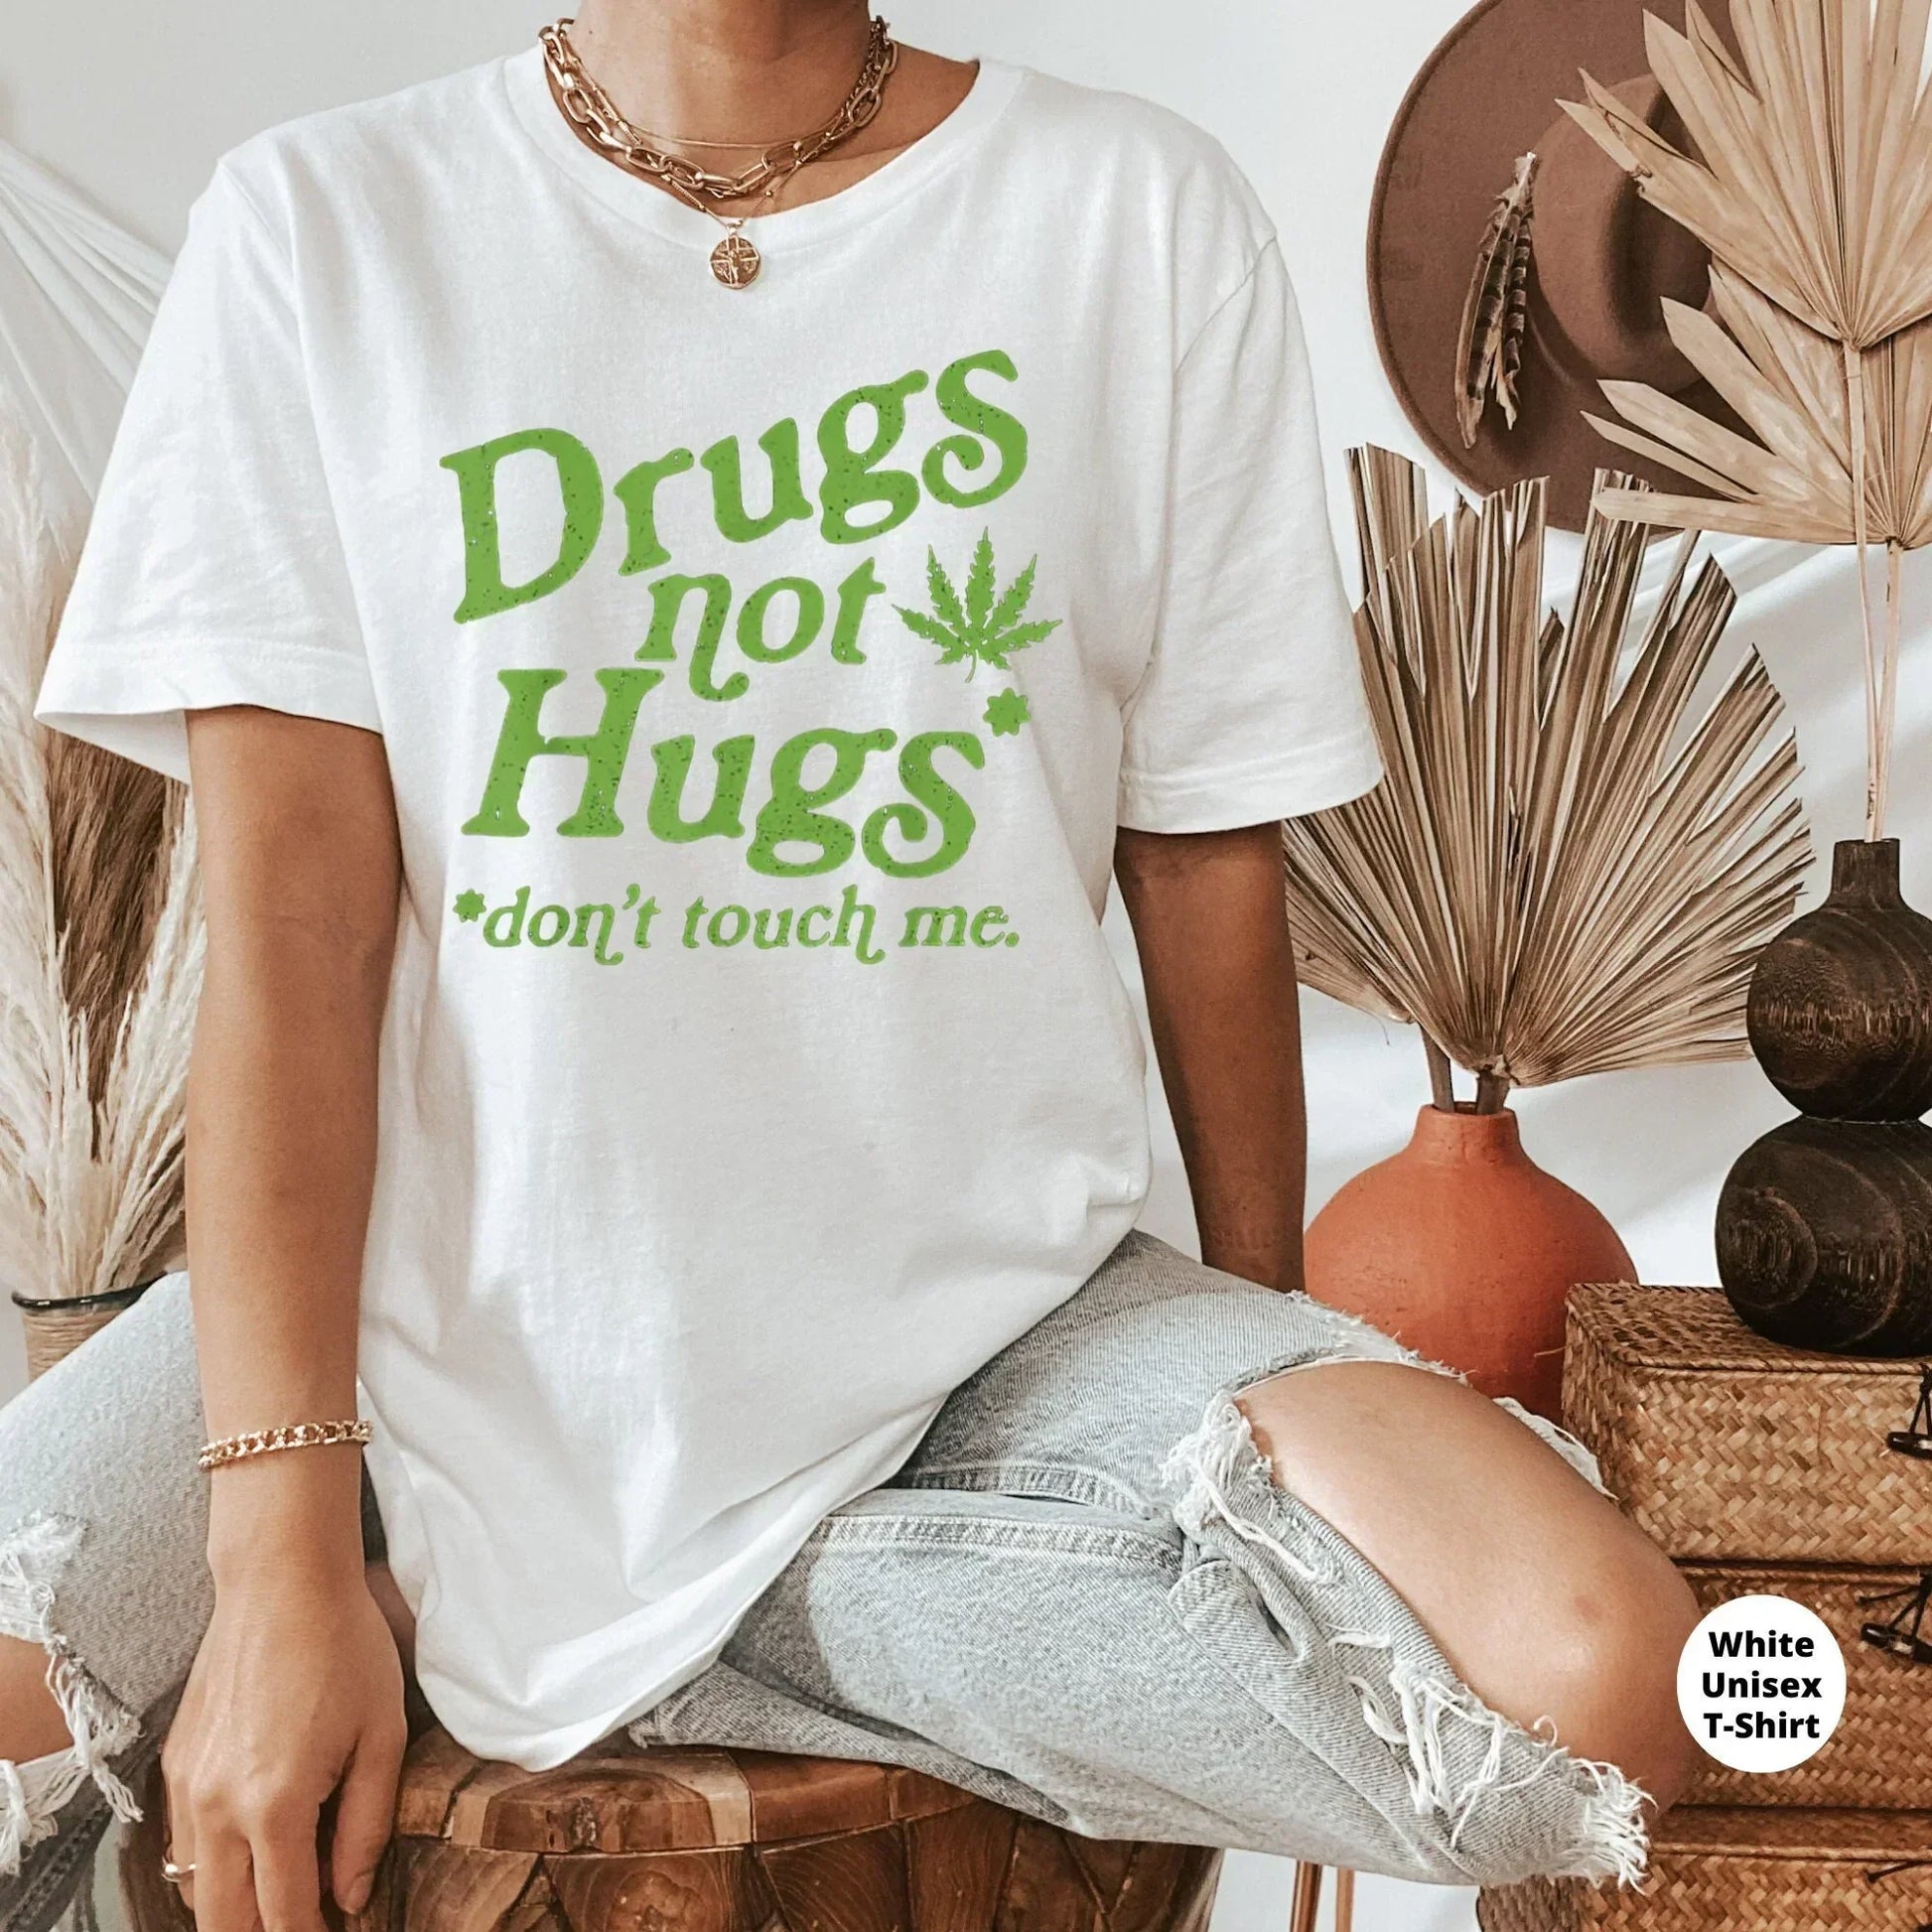 Stoner Gifts, Hippie Clothes, Weed Gifts, Weed Shirt, 420 Gift, Stoner –  HMDesignStudioUS